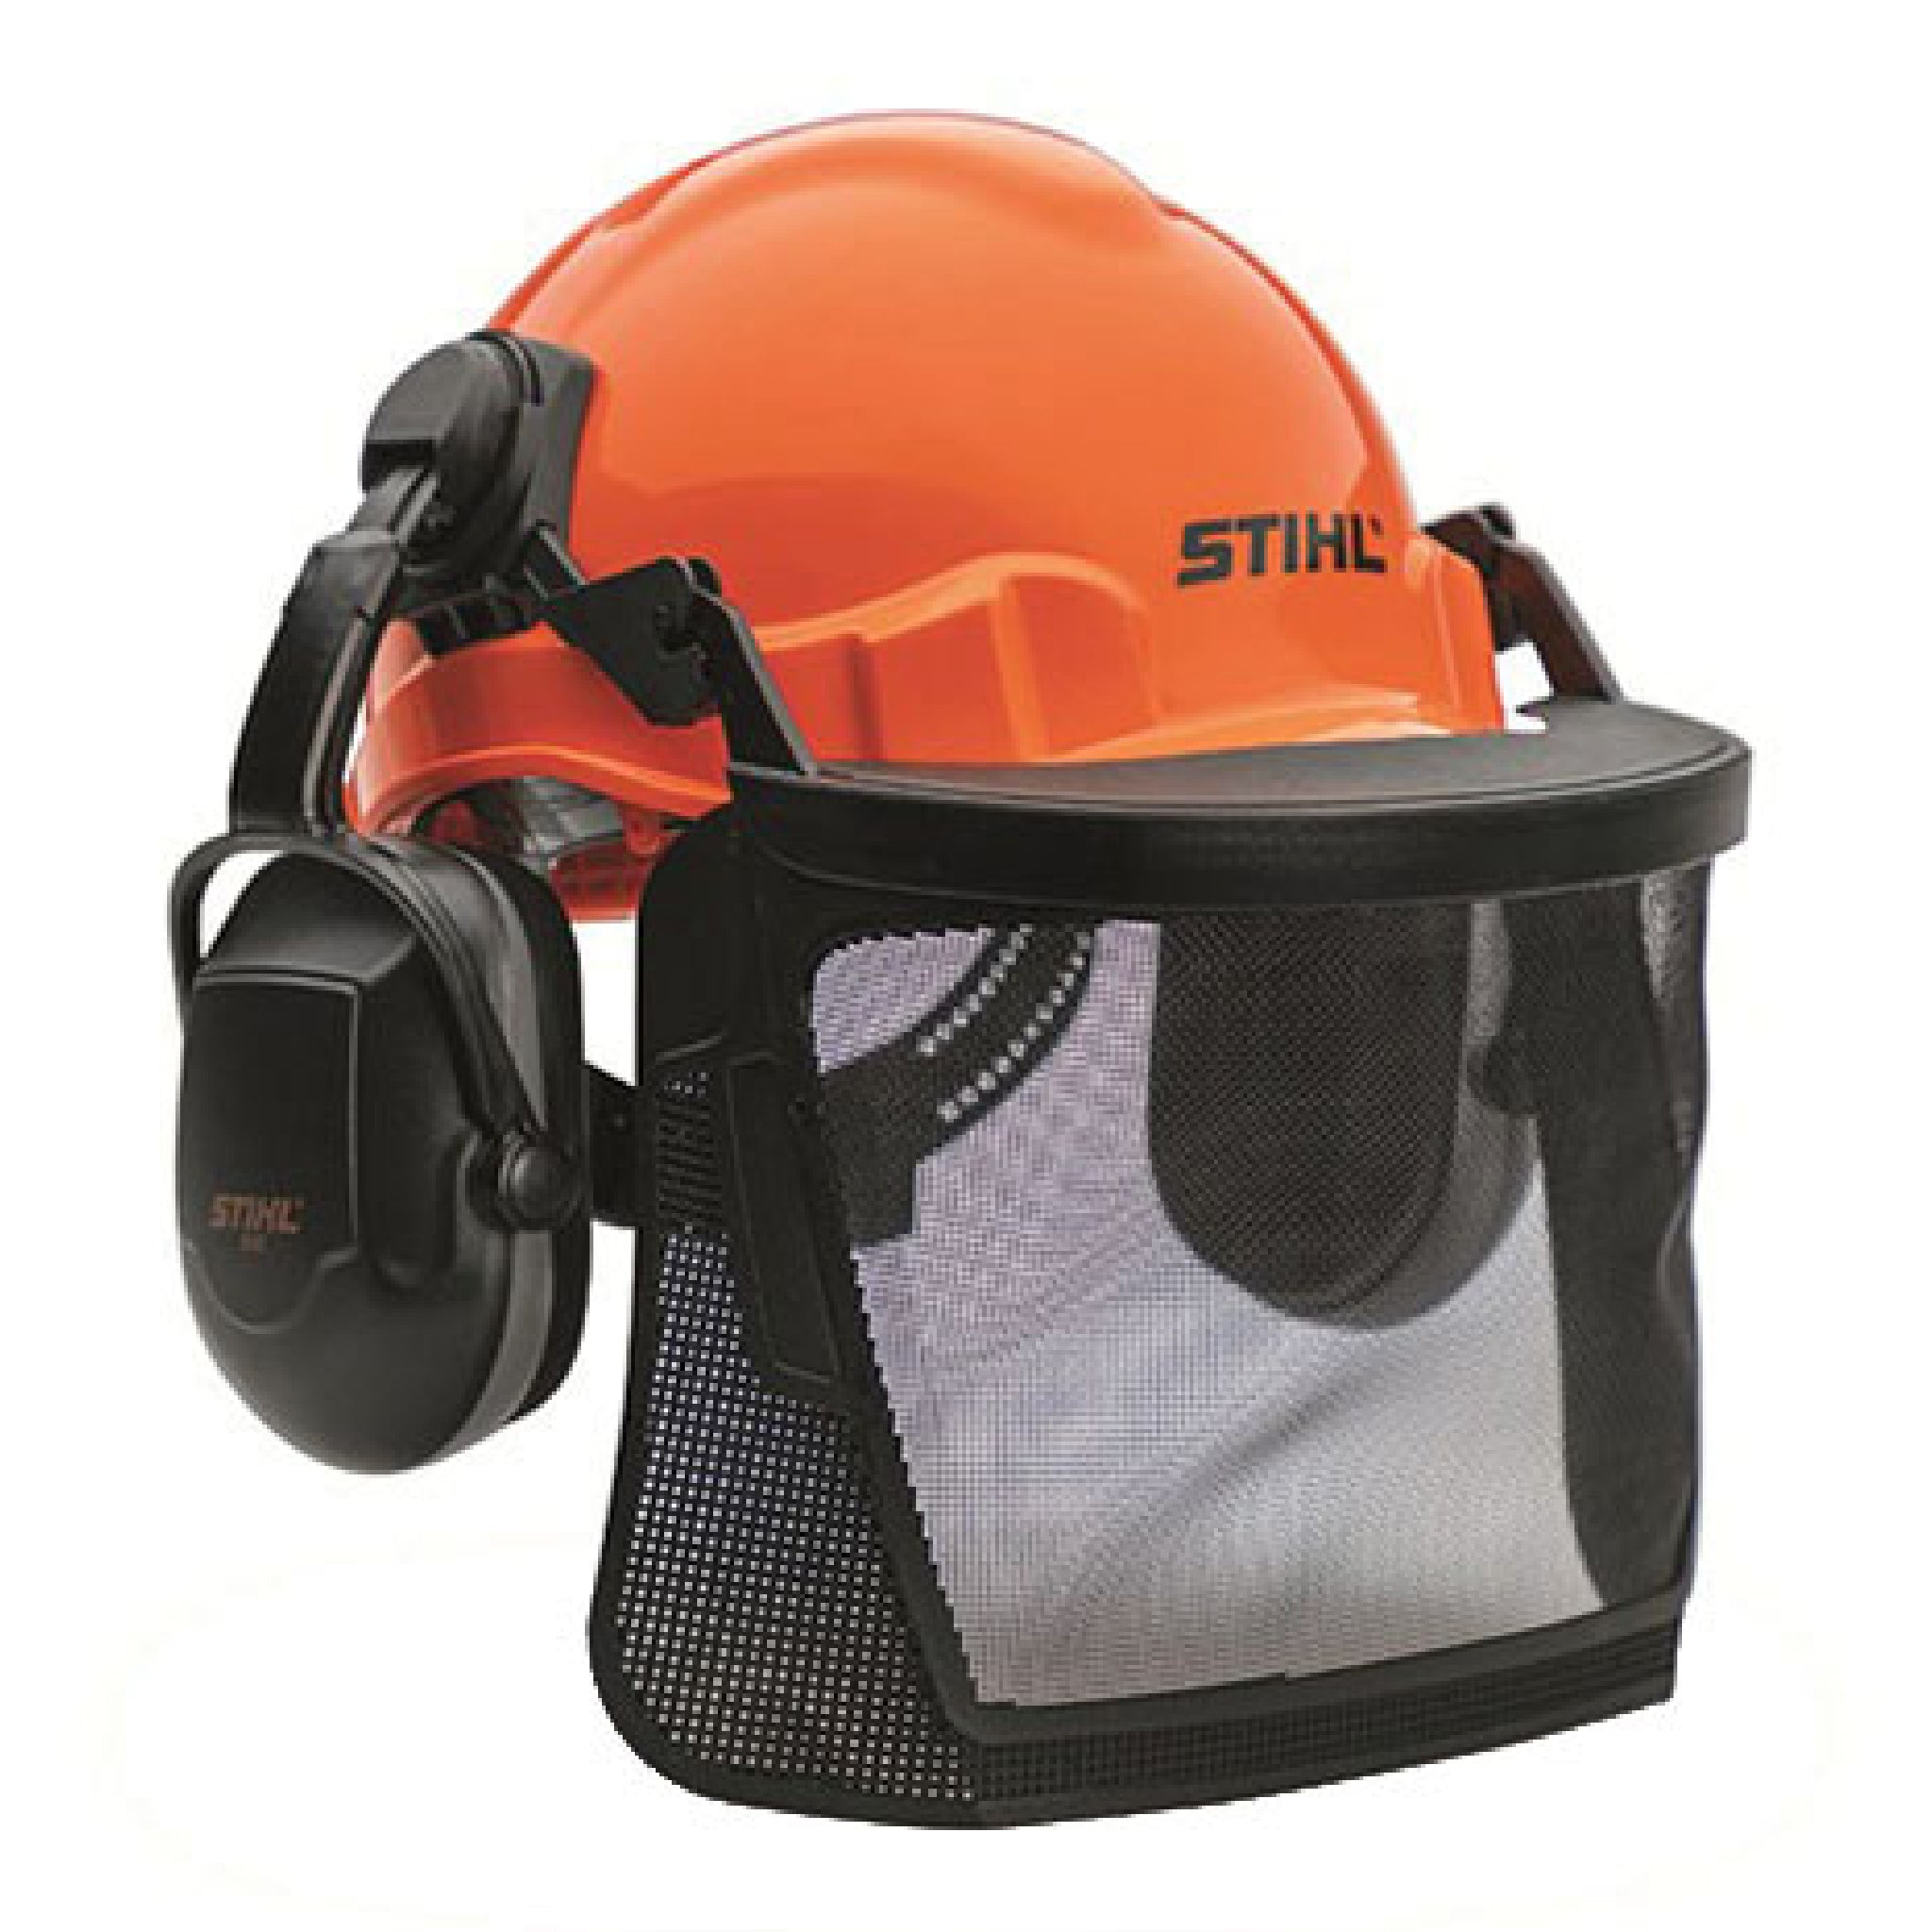 Stihl 7010 888 0800 Woodcutter Helmet System with Ear & Face Protection